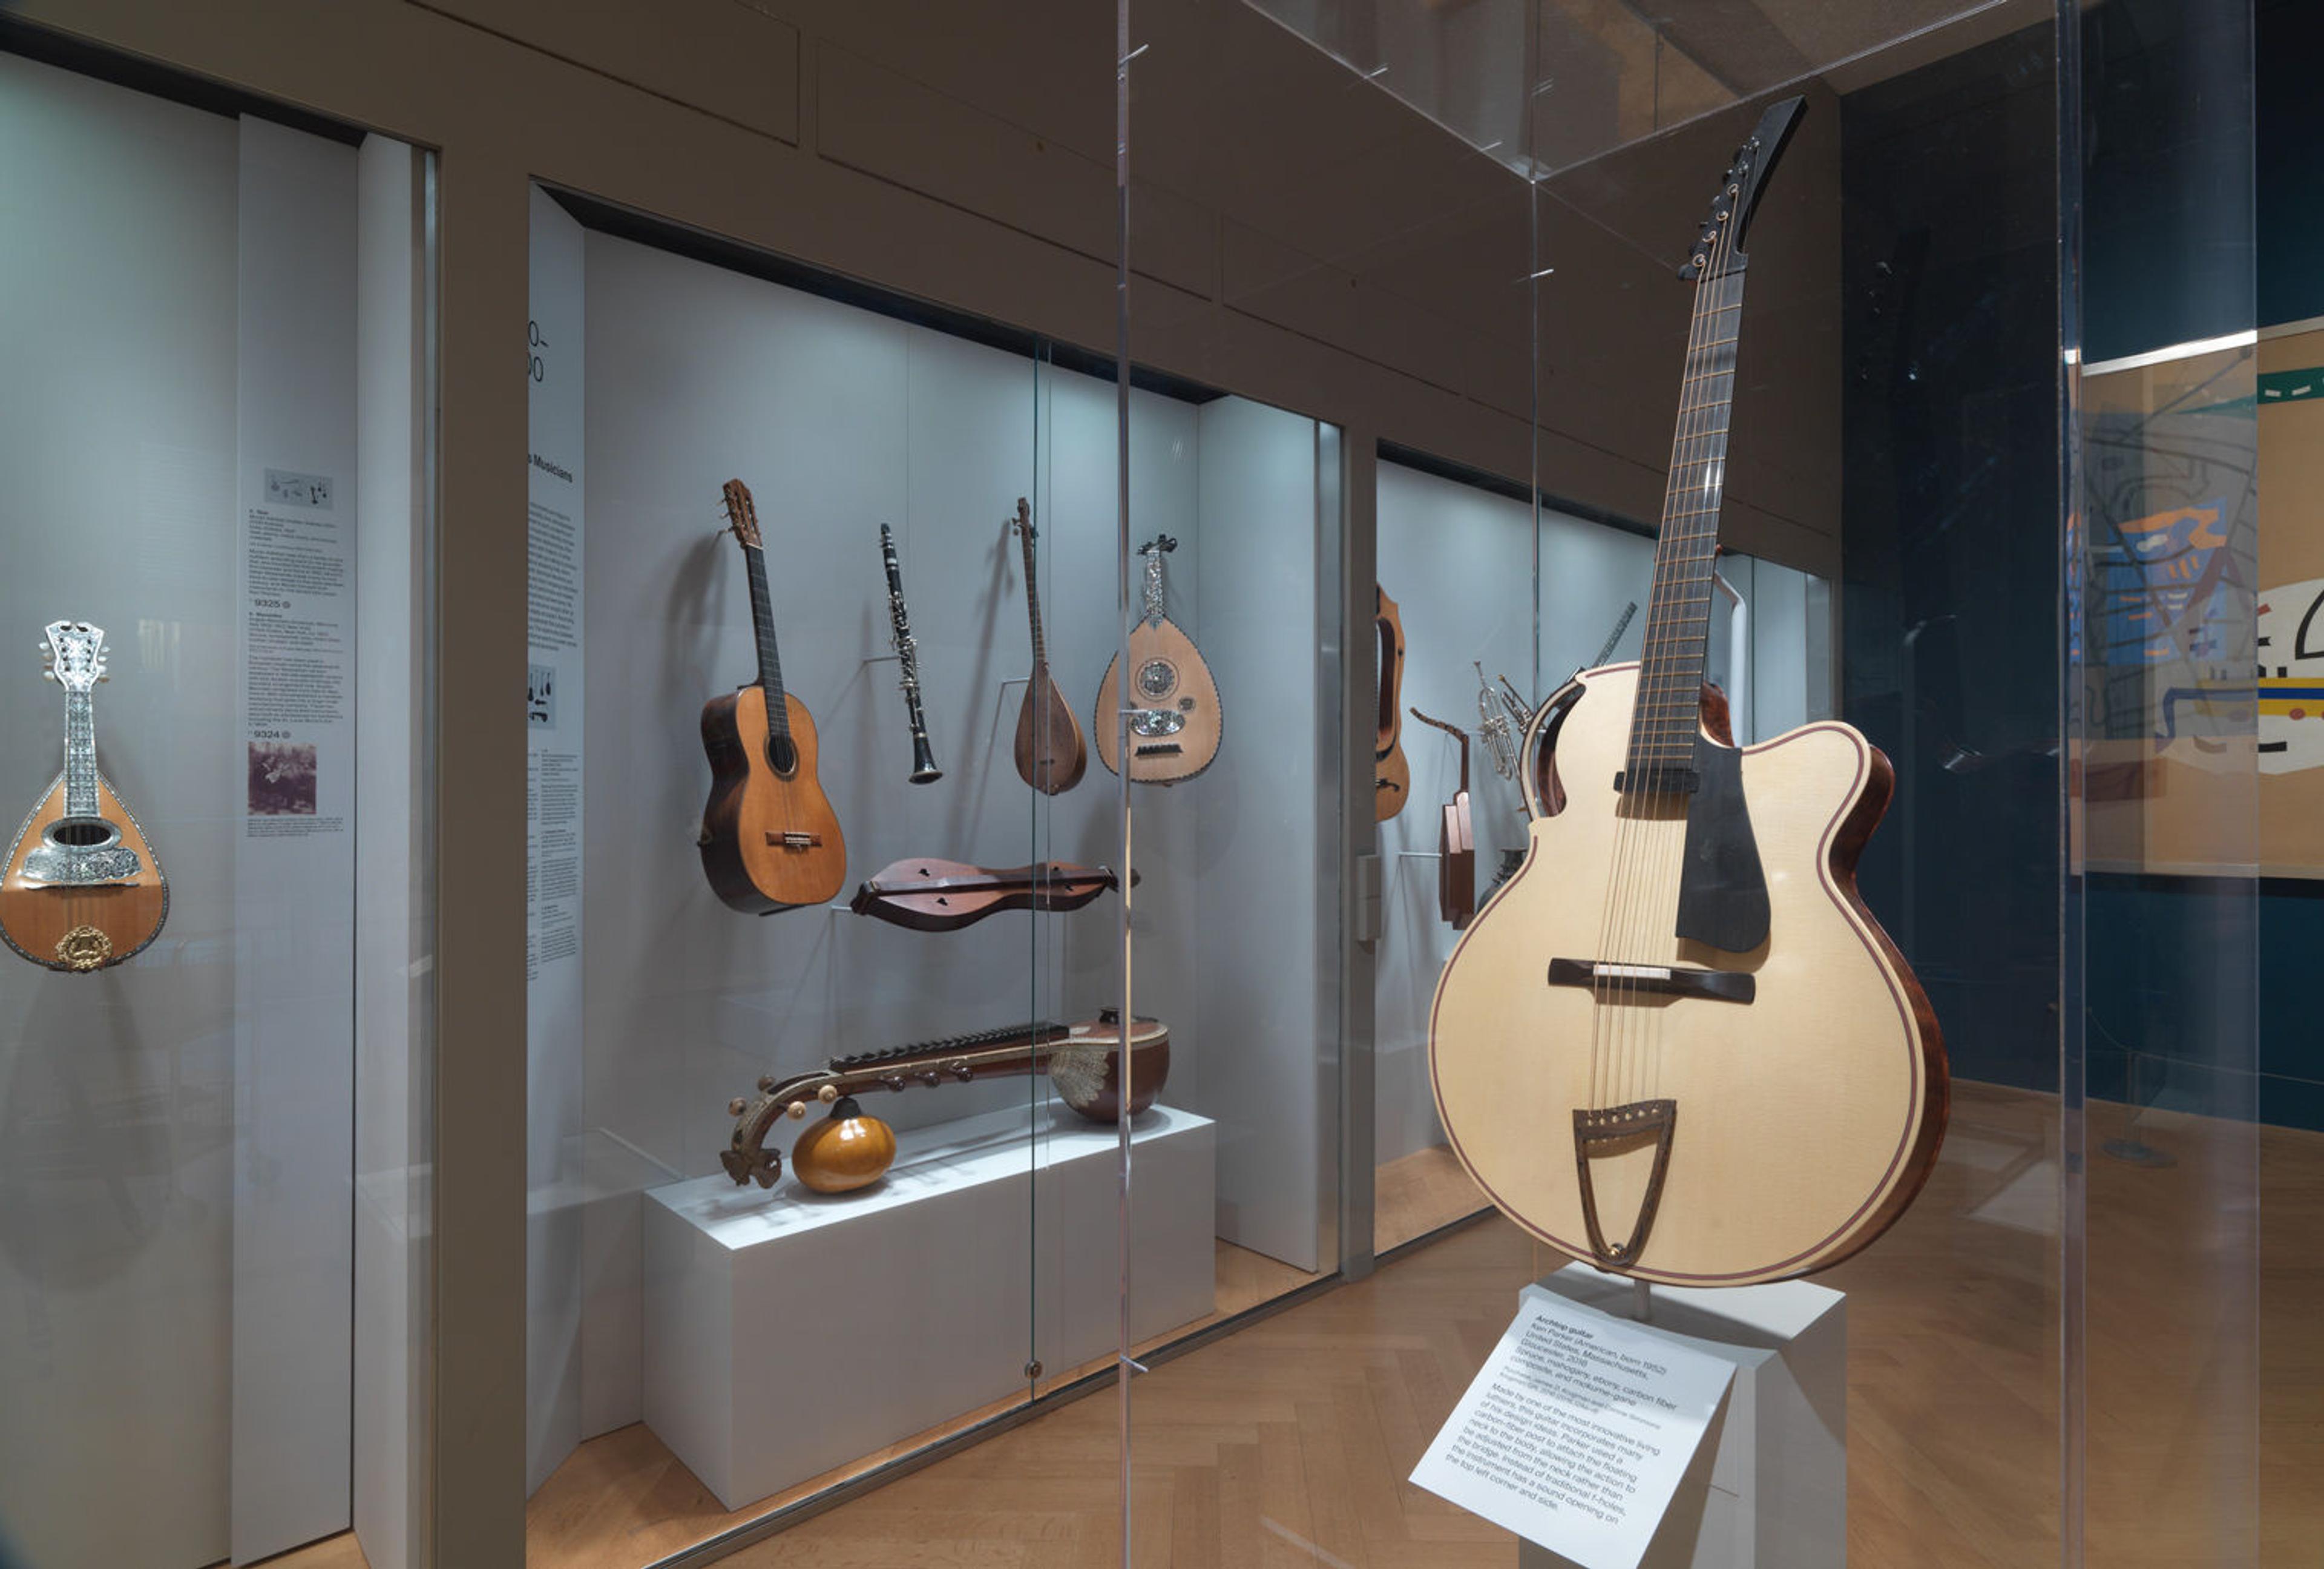 Picture of one of the musical instrument galleries at The Met, with several instruments such as guitars and mandolins in glass cases.